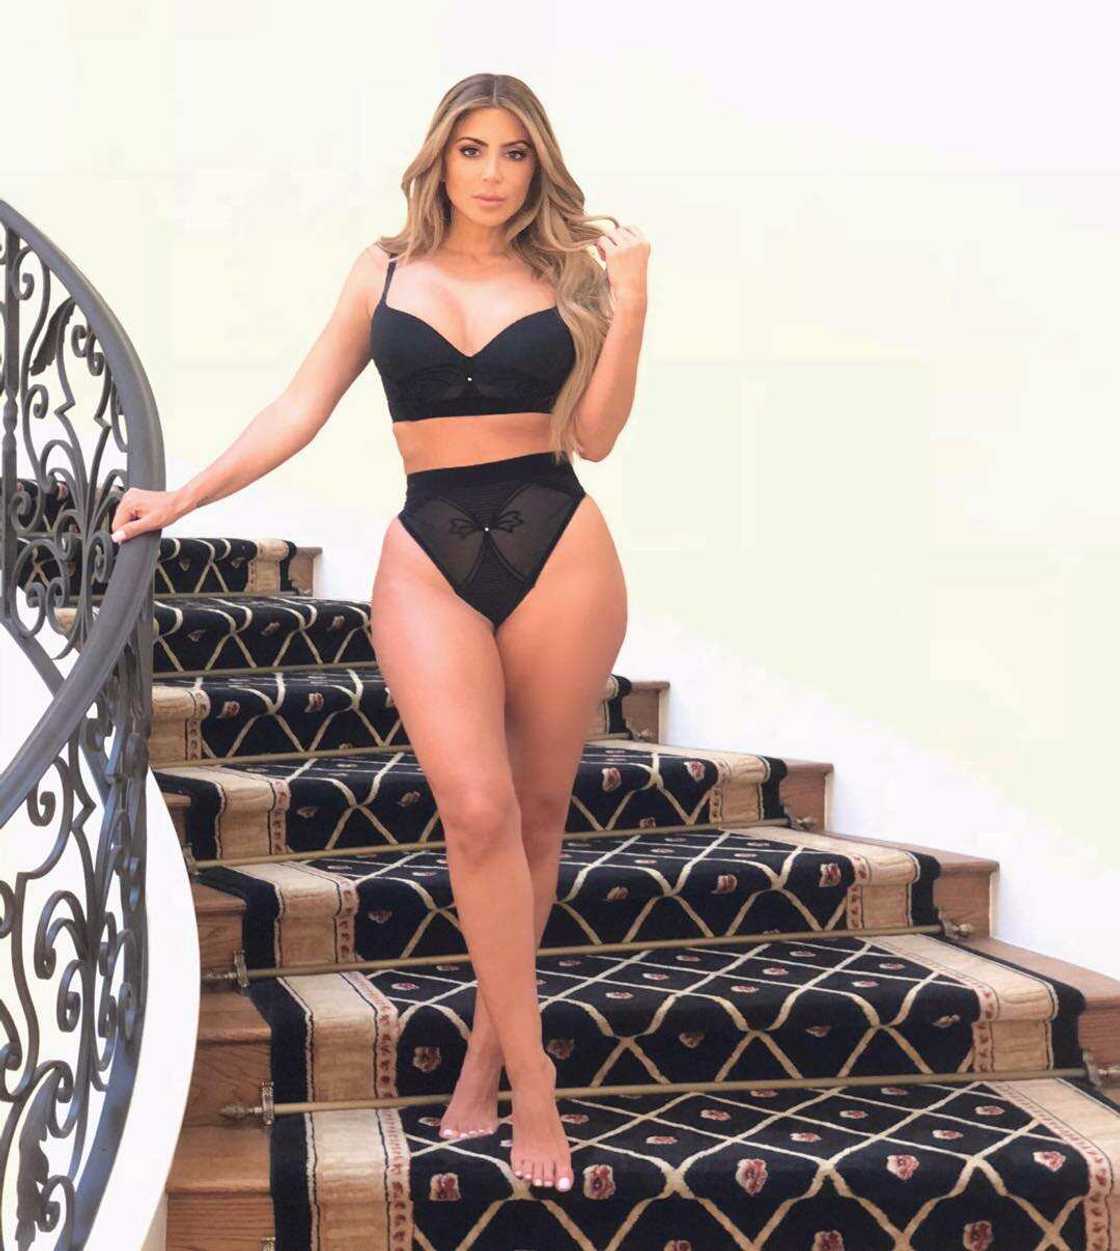 Larsa Pippen young